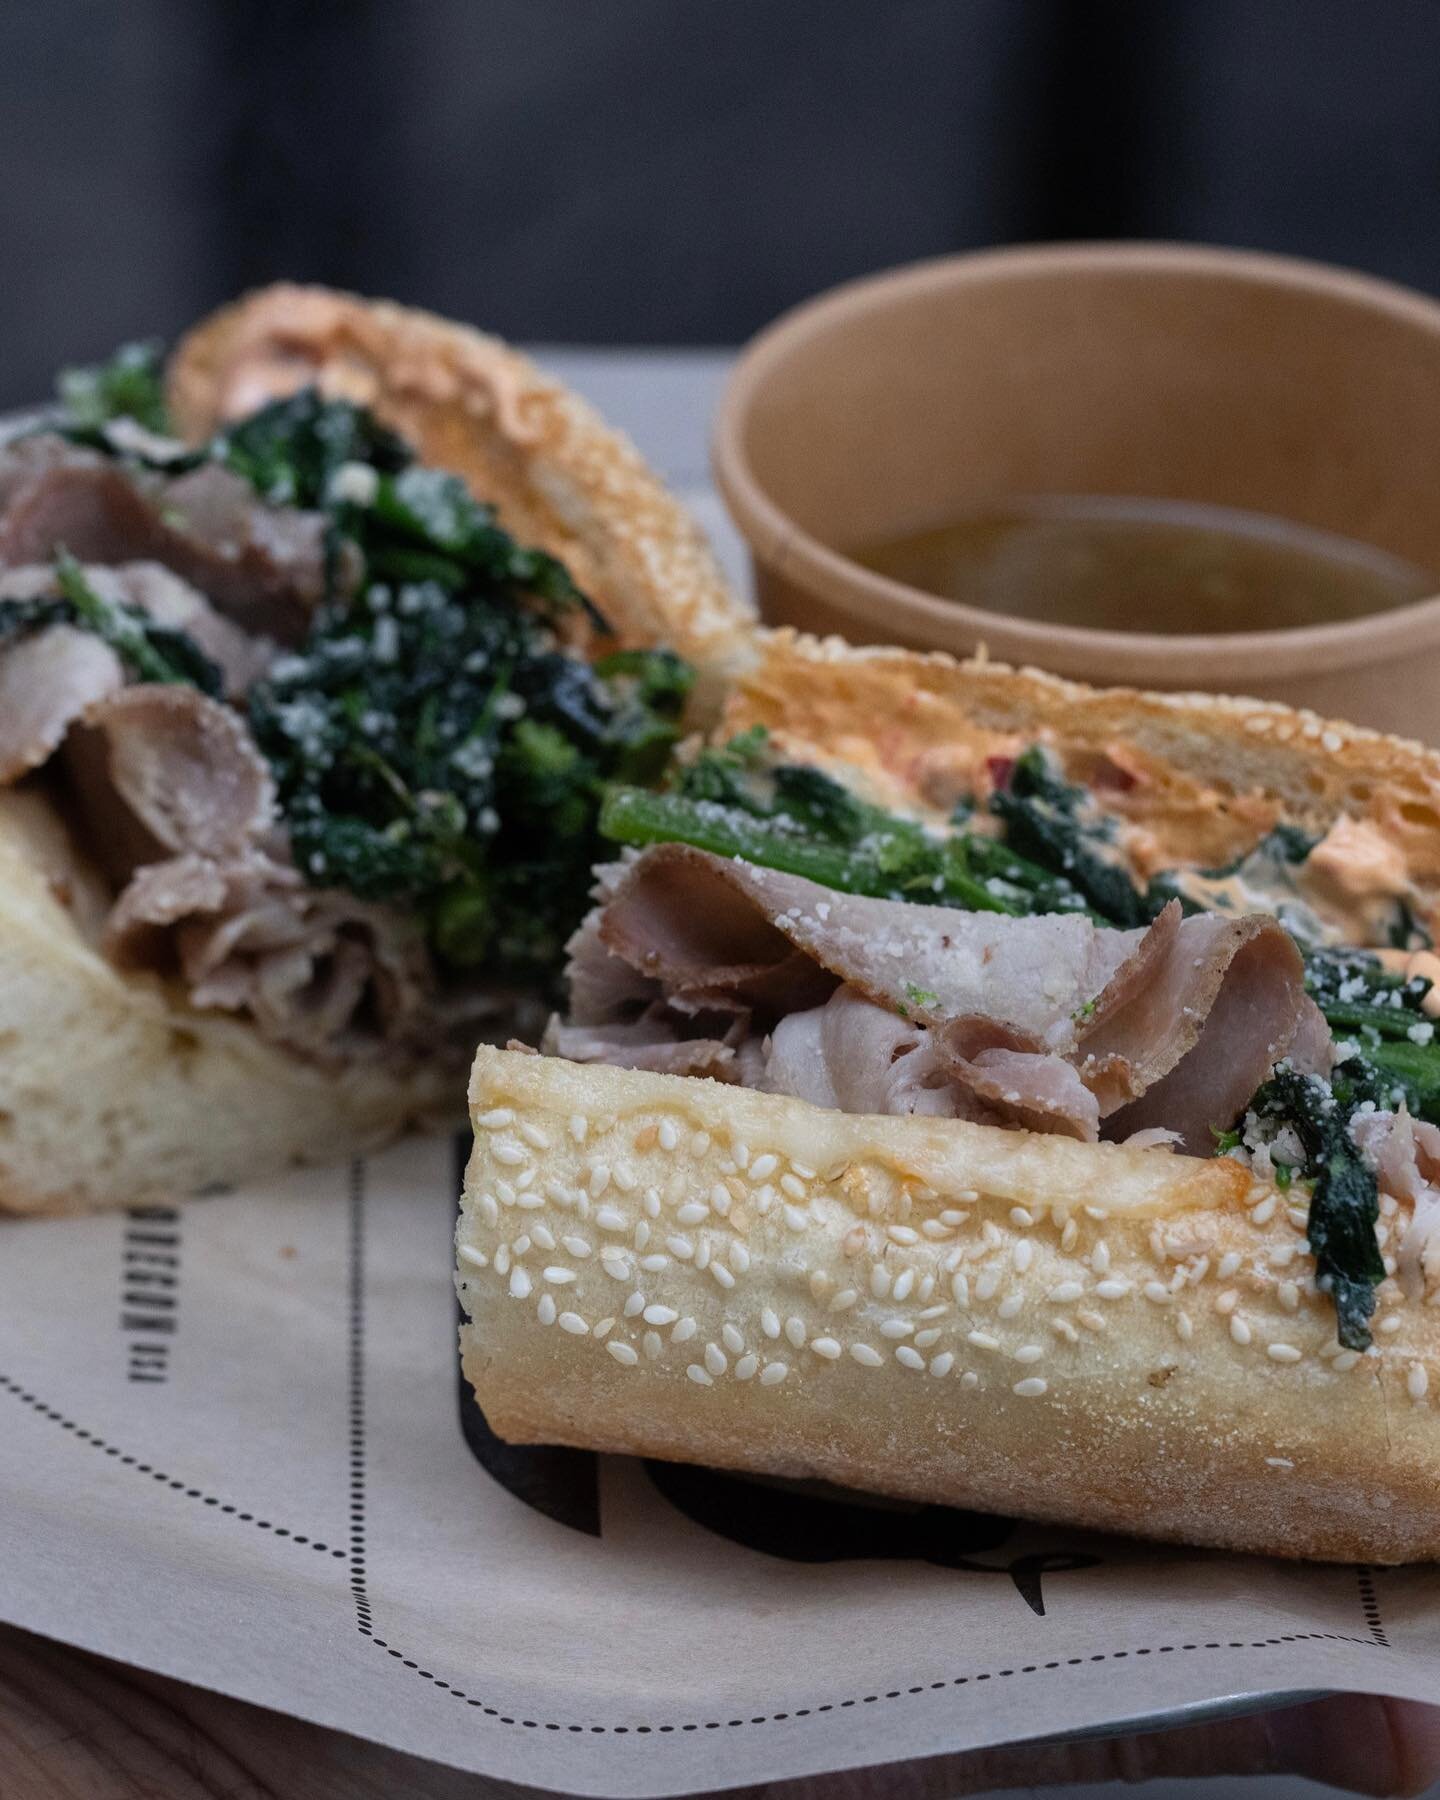 For when you need some jus. 

Reminder: the Philly Roast Pork is at Hawthorne only!

Philly roast pork, pan drippings, melted aged provolone, broccoli raab, Calabrian mayo, sesame torpedo roll @2_hermanos_bakery, pork jus for dipping! 
-
📸@alanweine